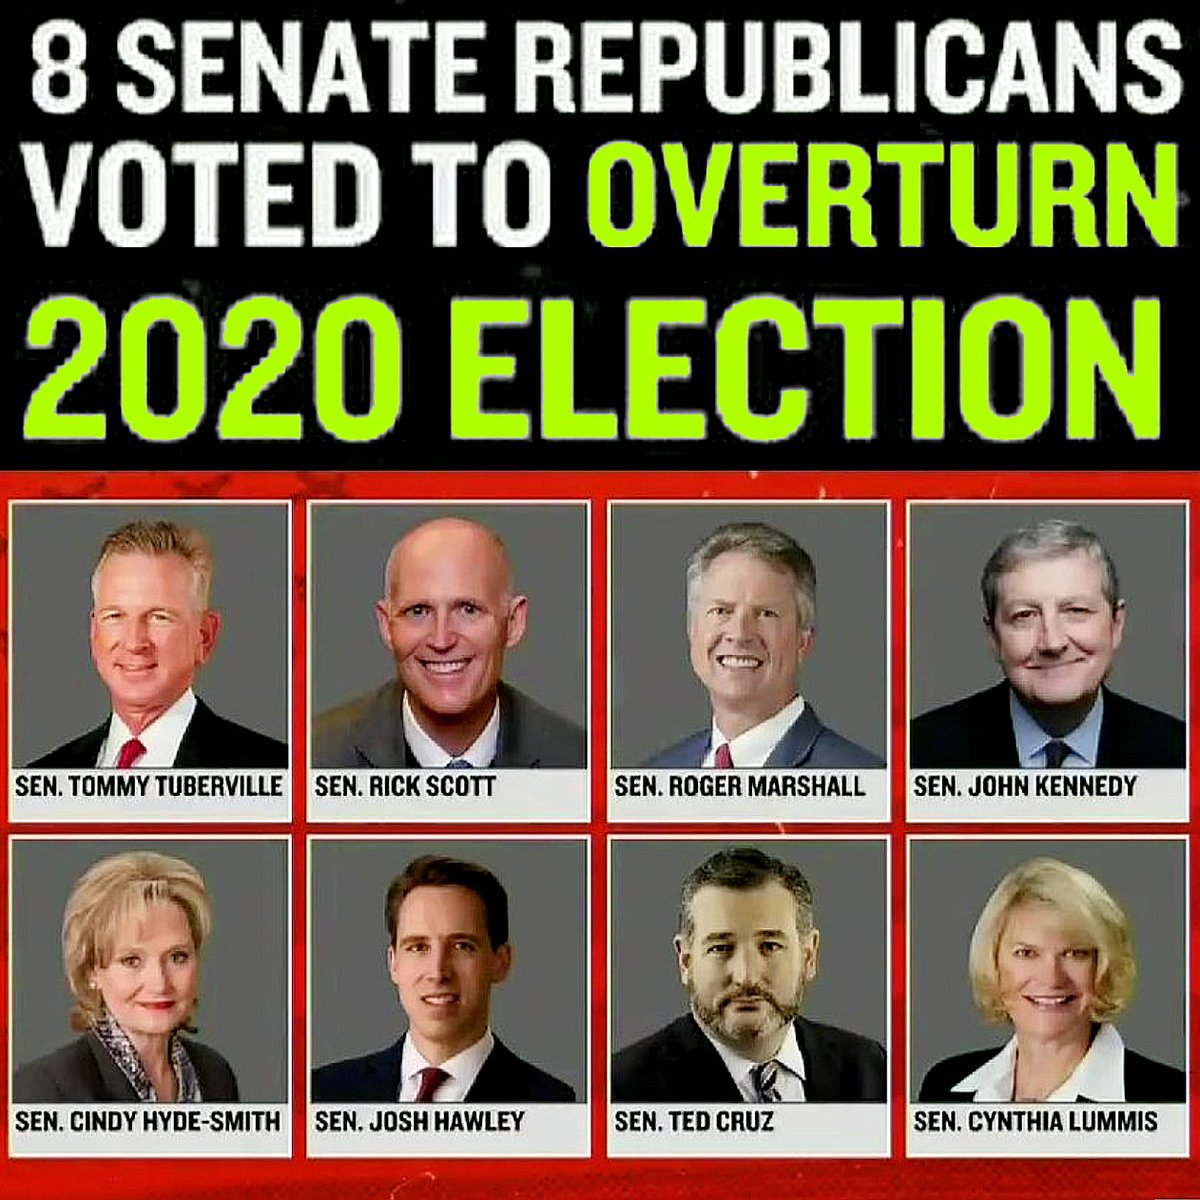 @MuellerSheWrote 🧰 The Republicans in the senate that voted to overturn the 2020 election: